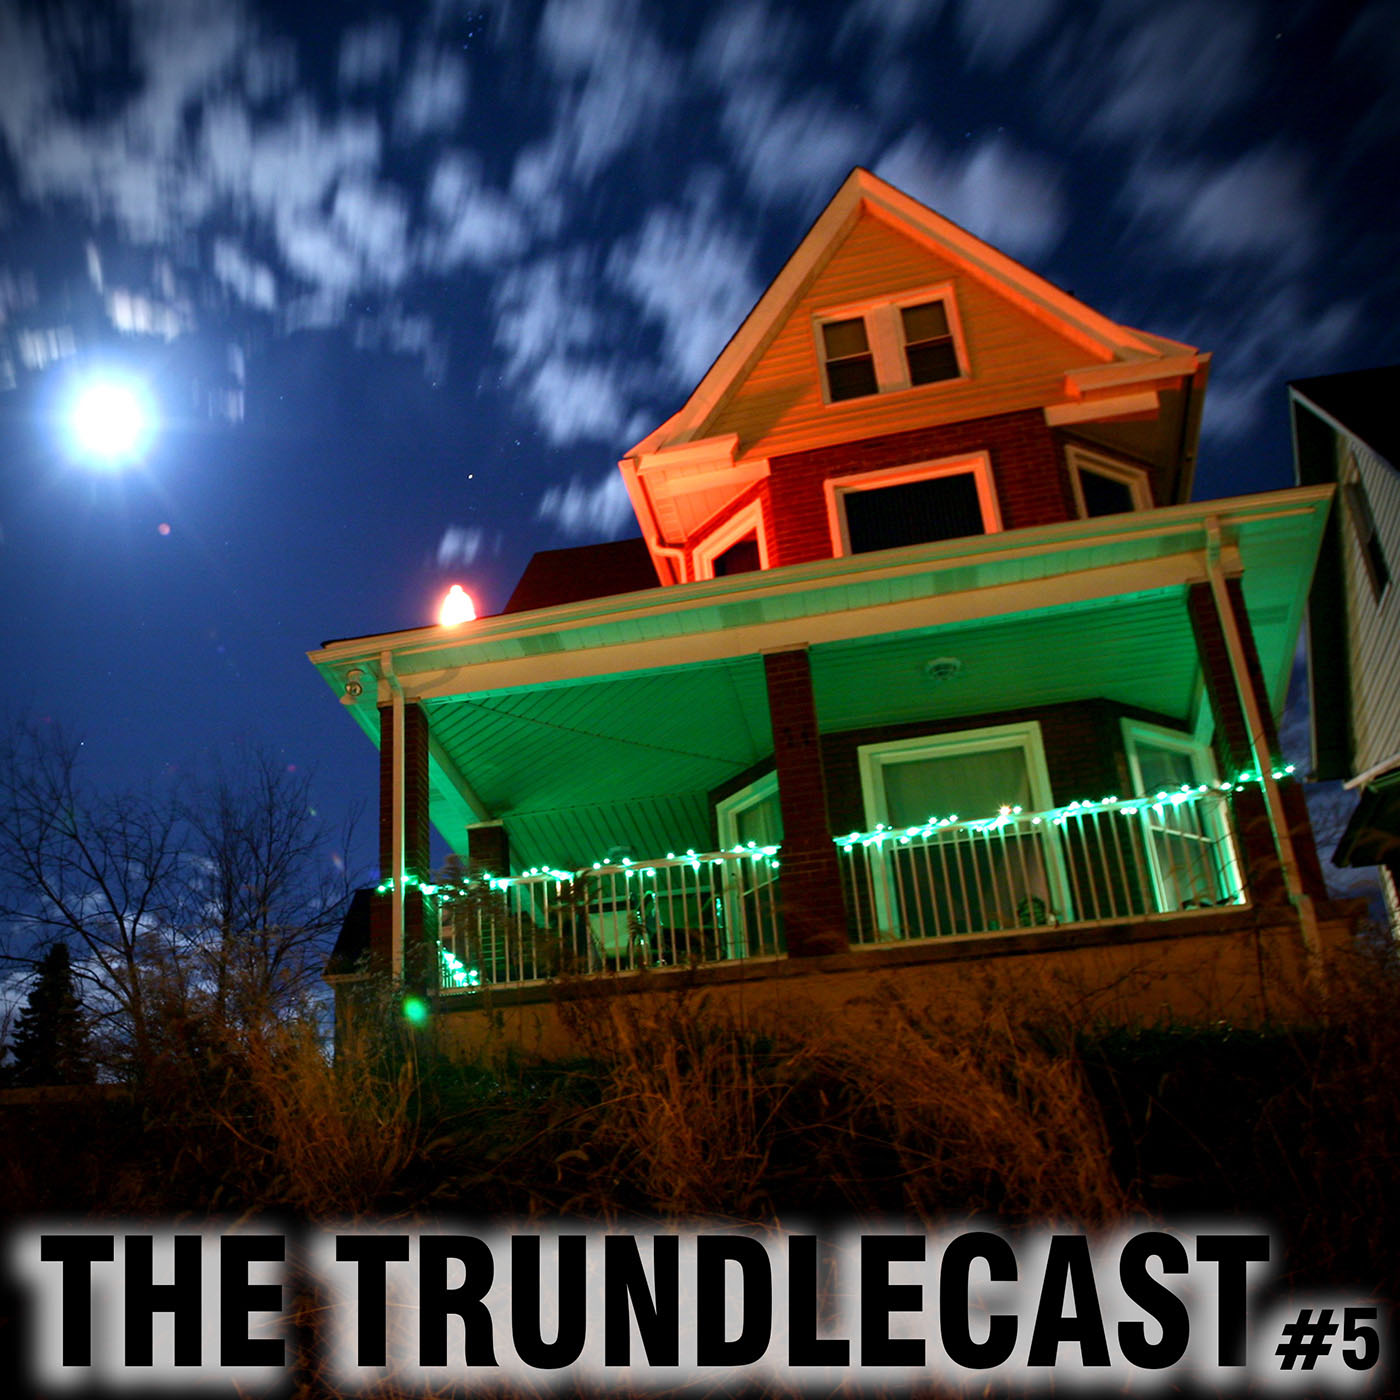 The 5th Trundlecast!